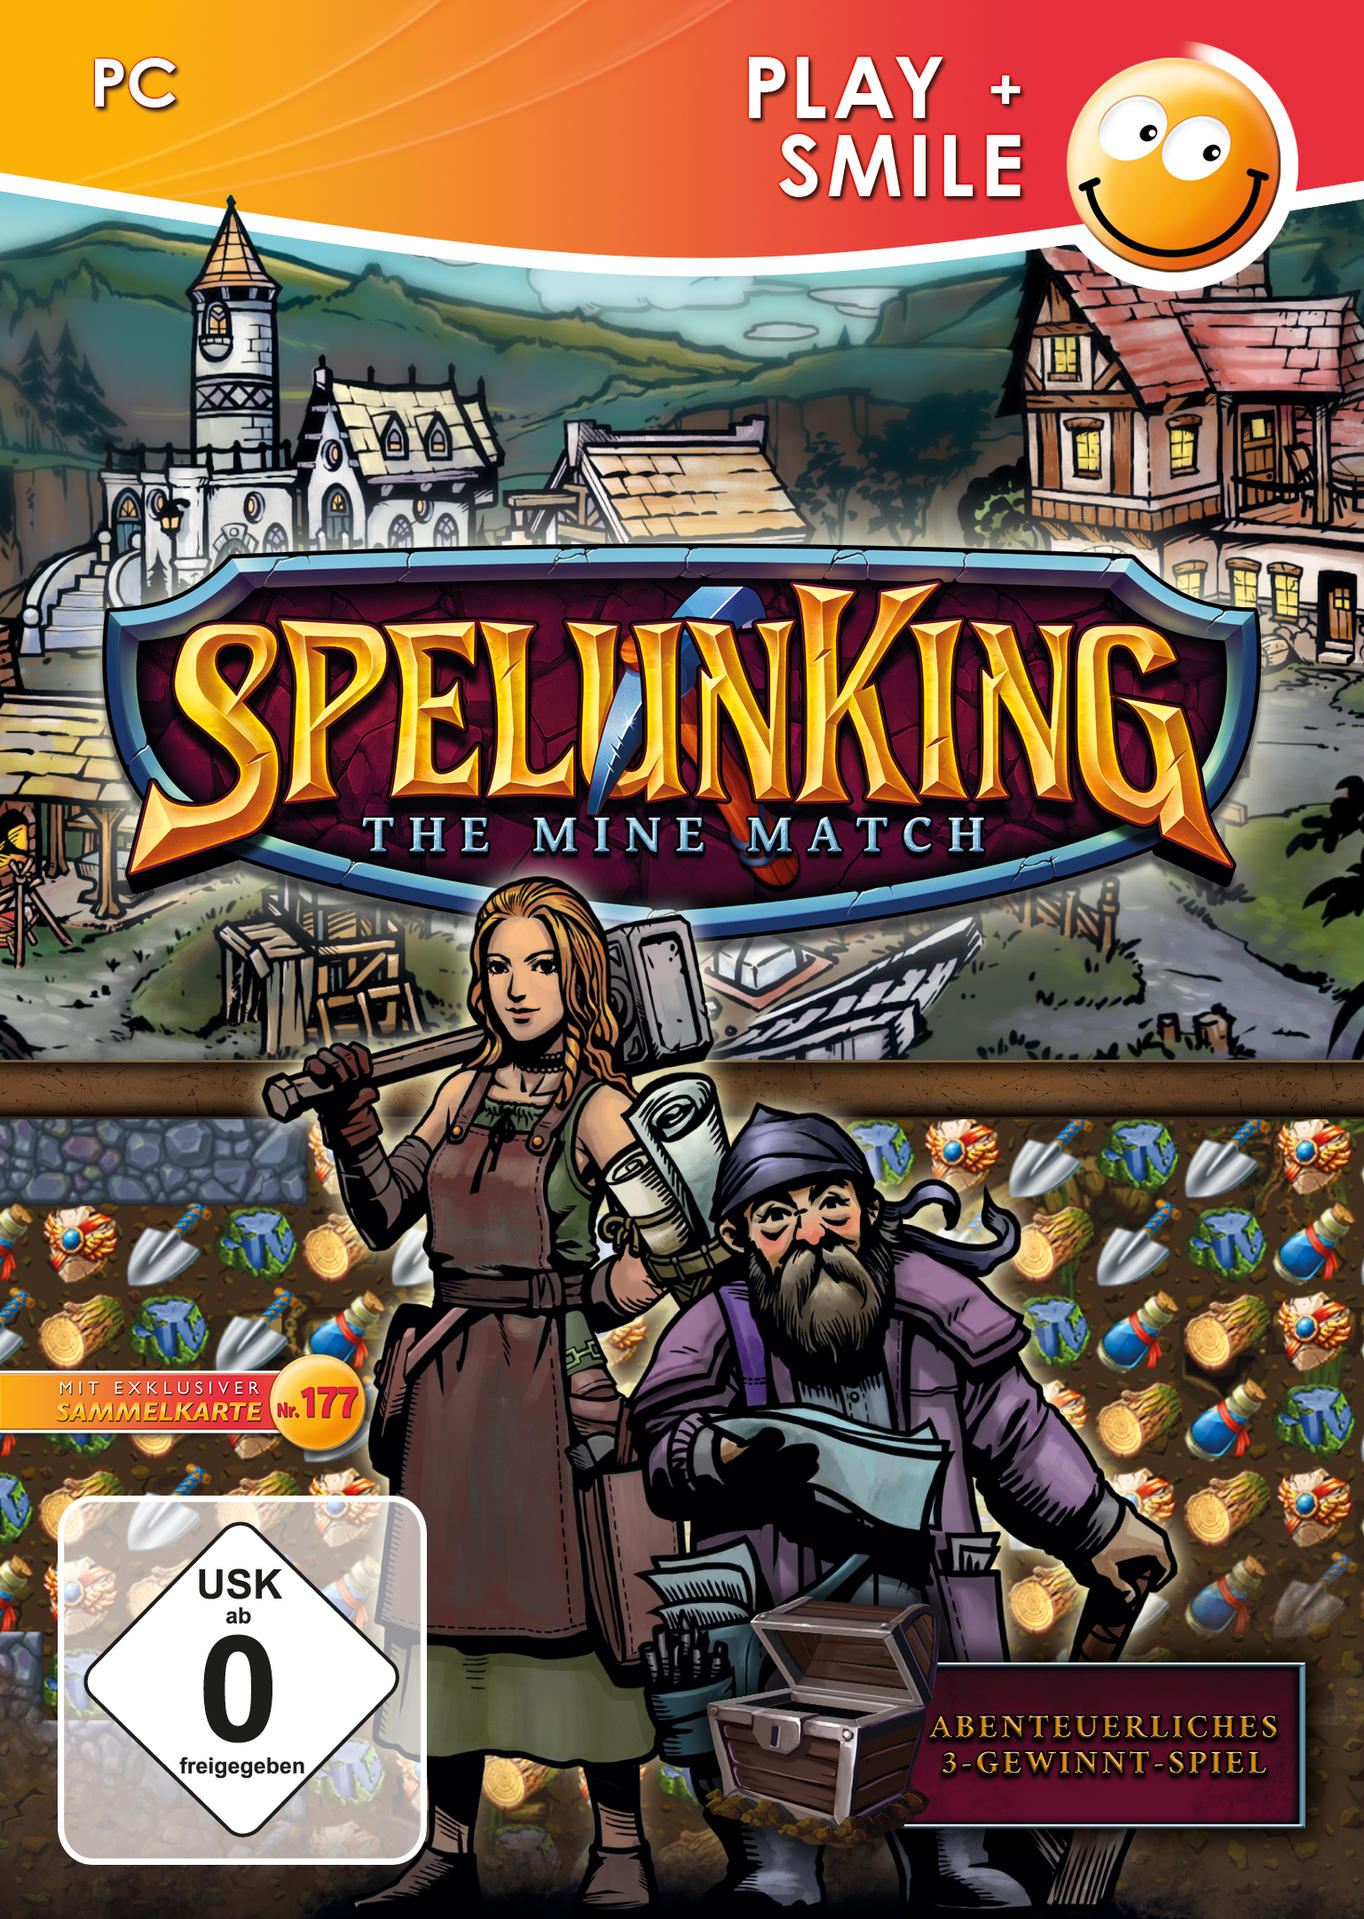 SpelunKing: The Mine Match [PC] 